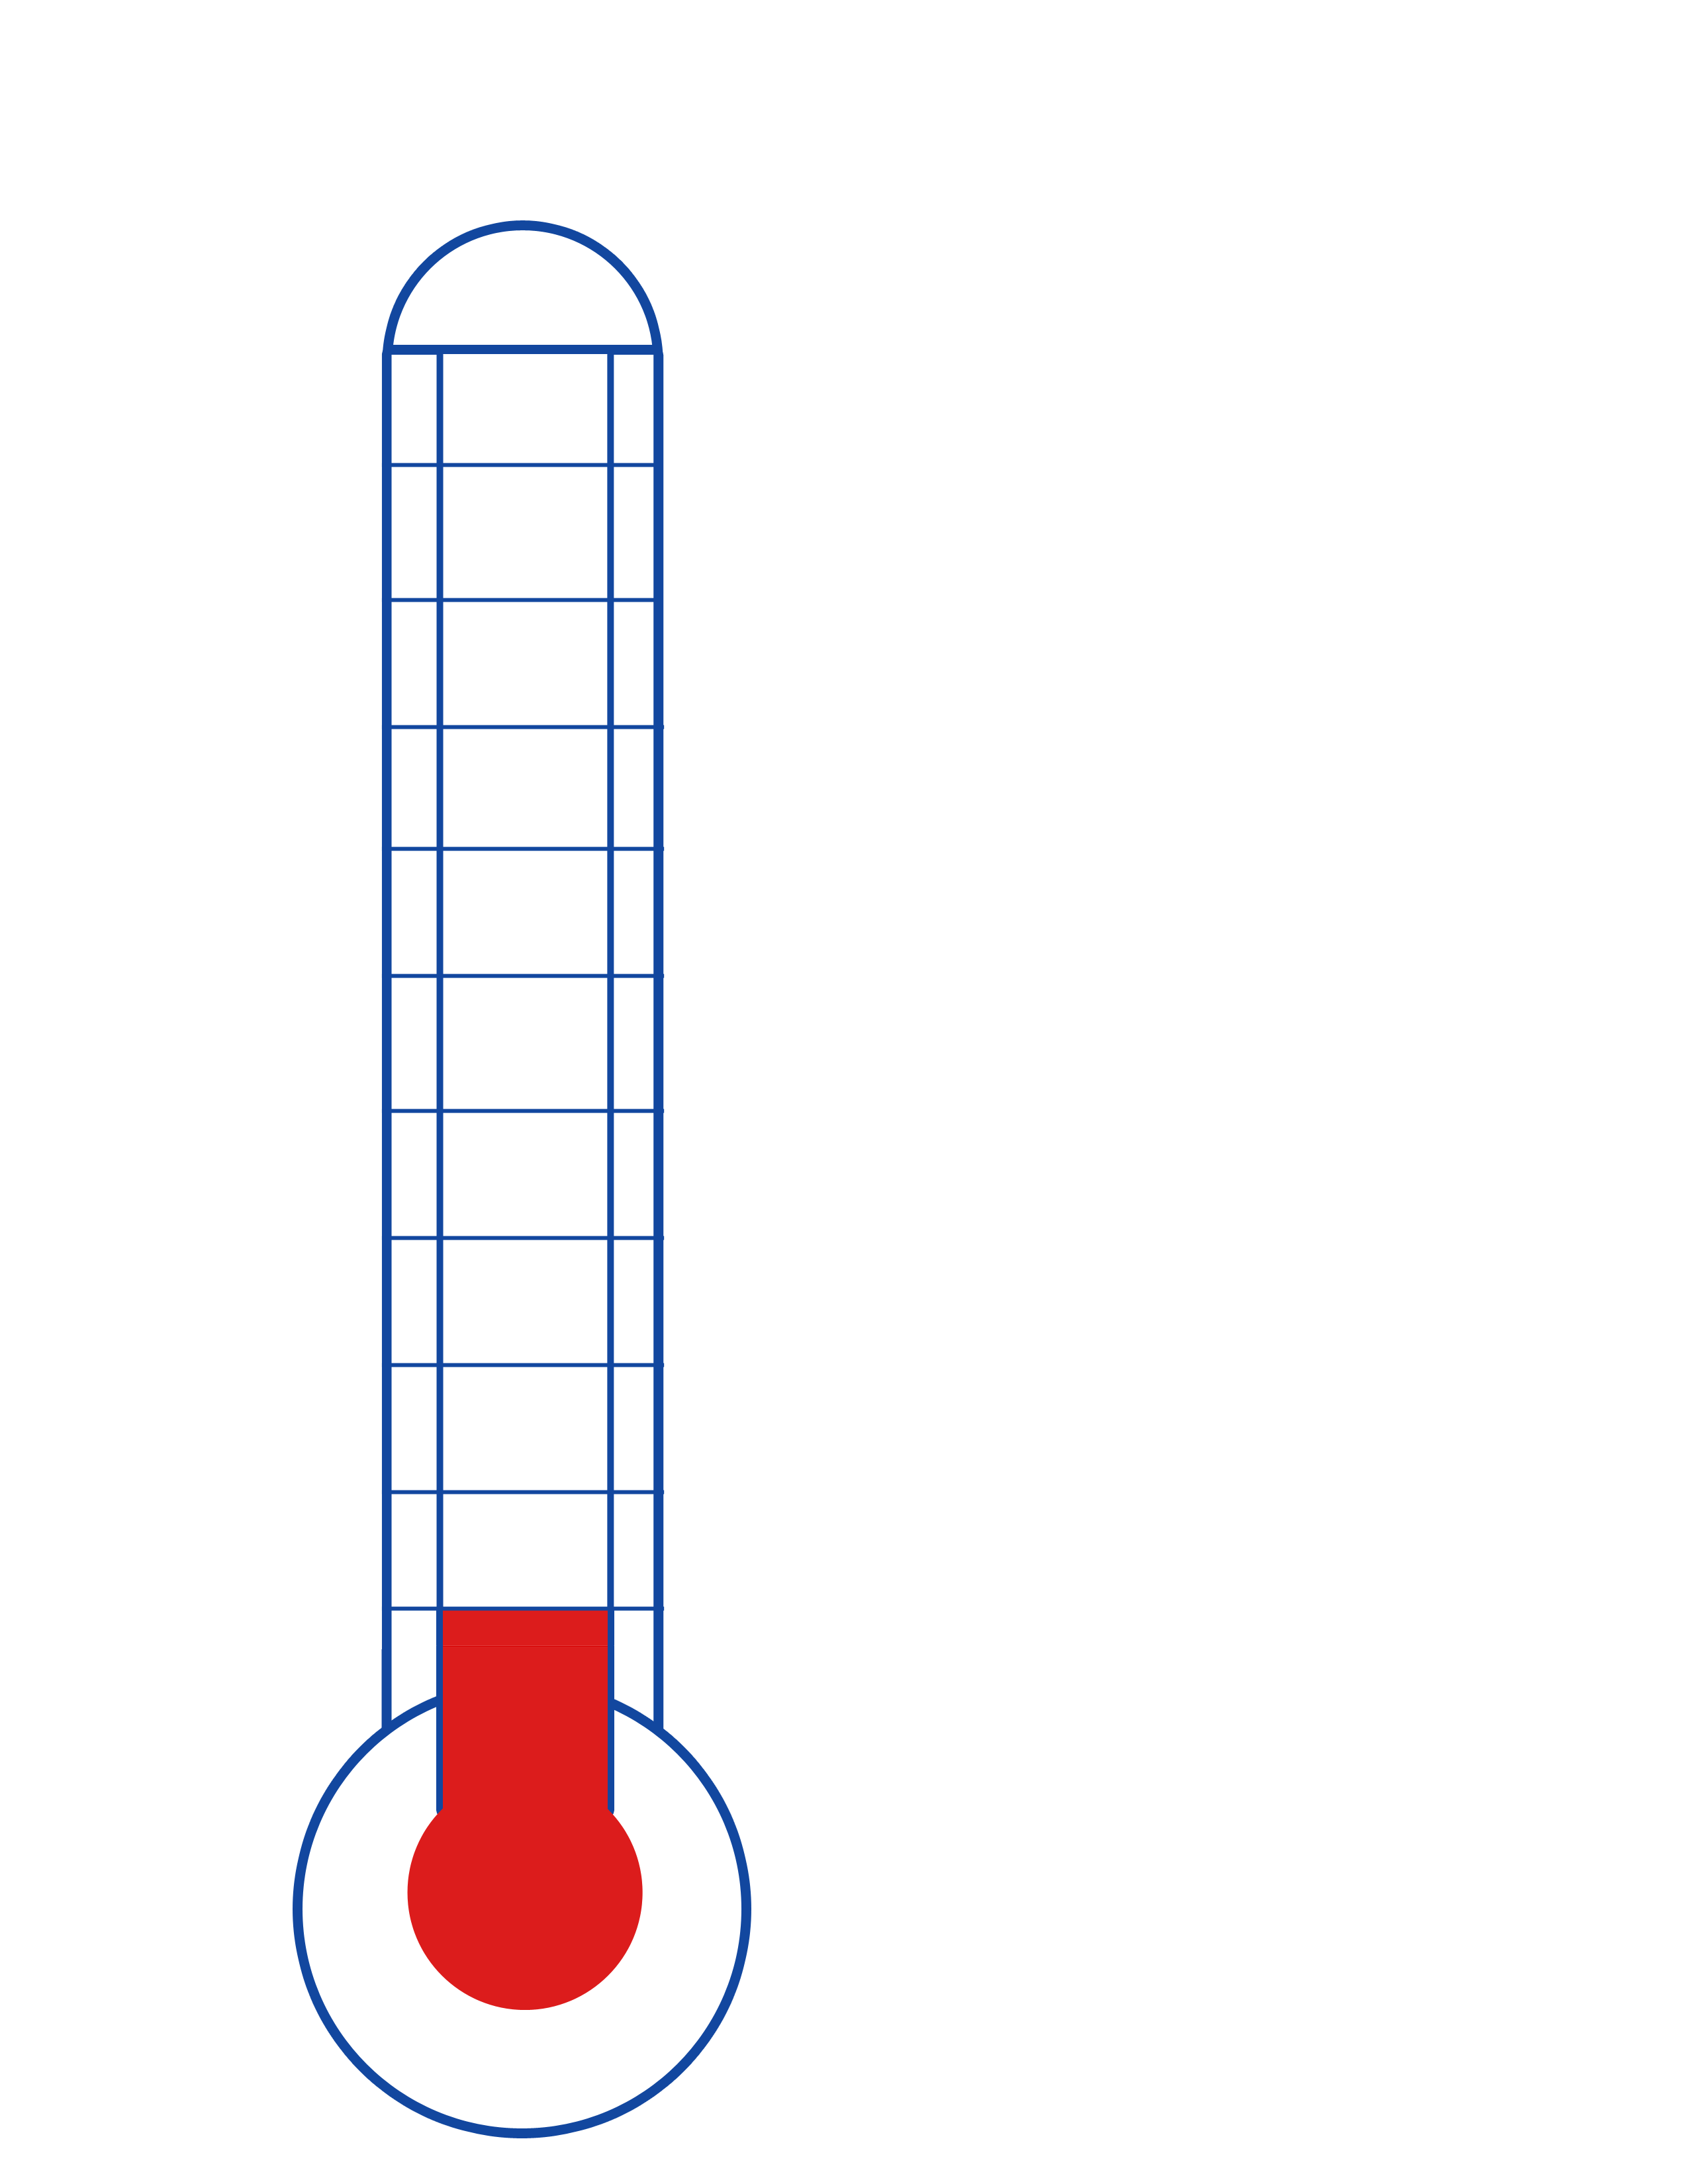 Fundraising blank thermometer template - worlanisfgod41's soup